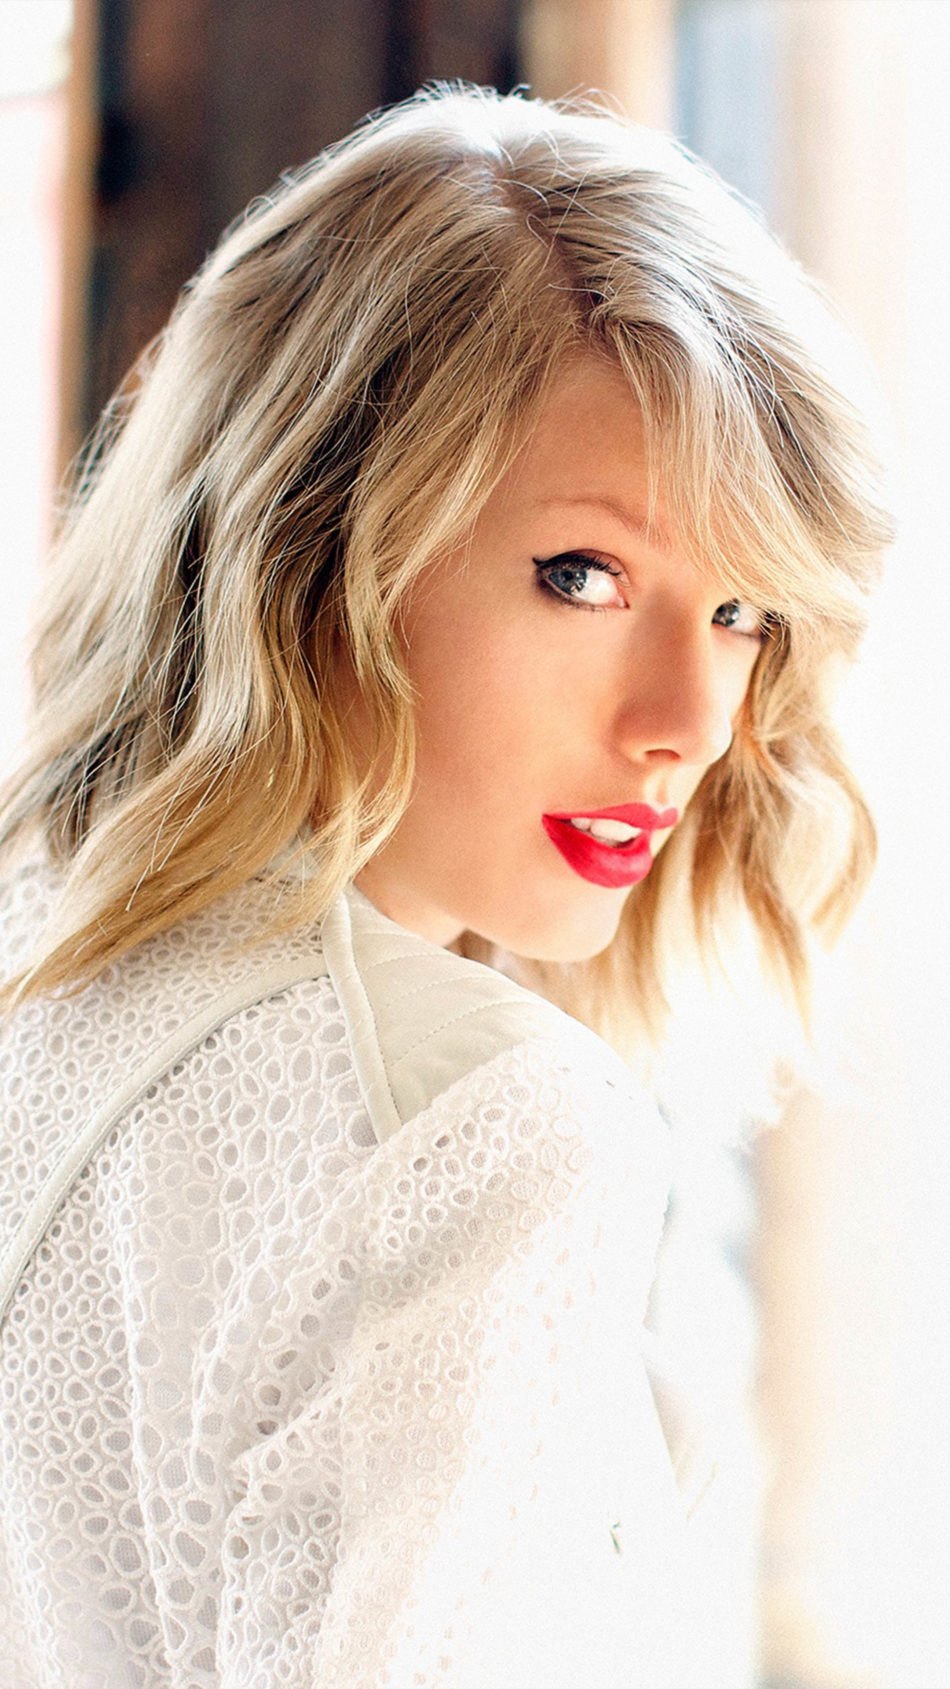 taylor swift red lips photo download